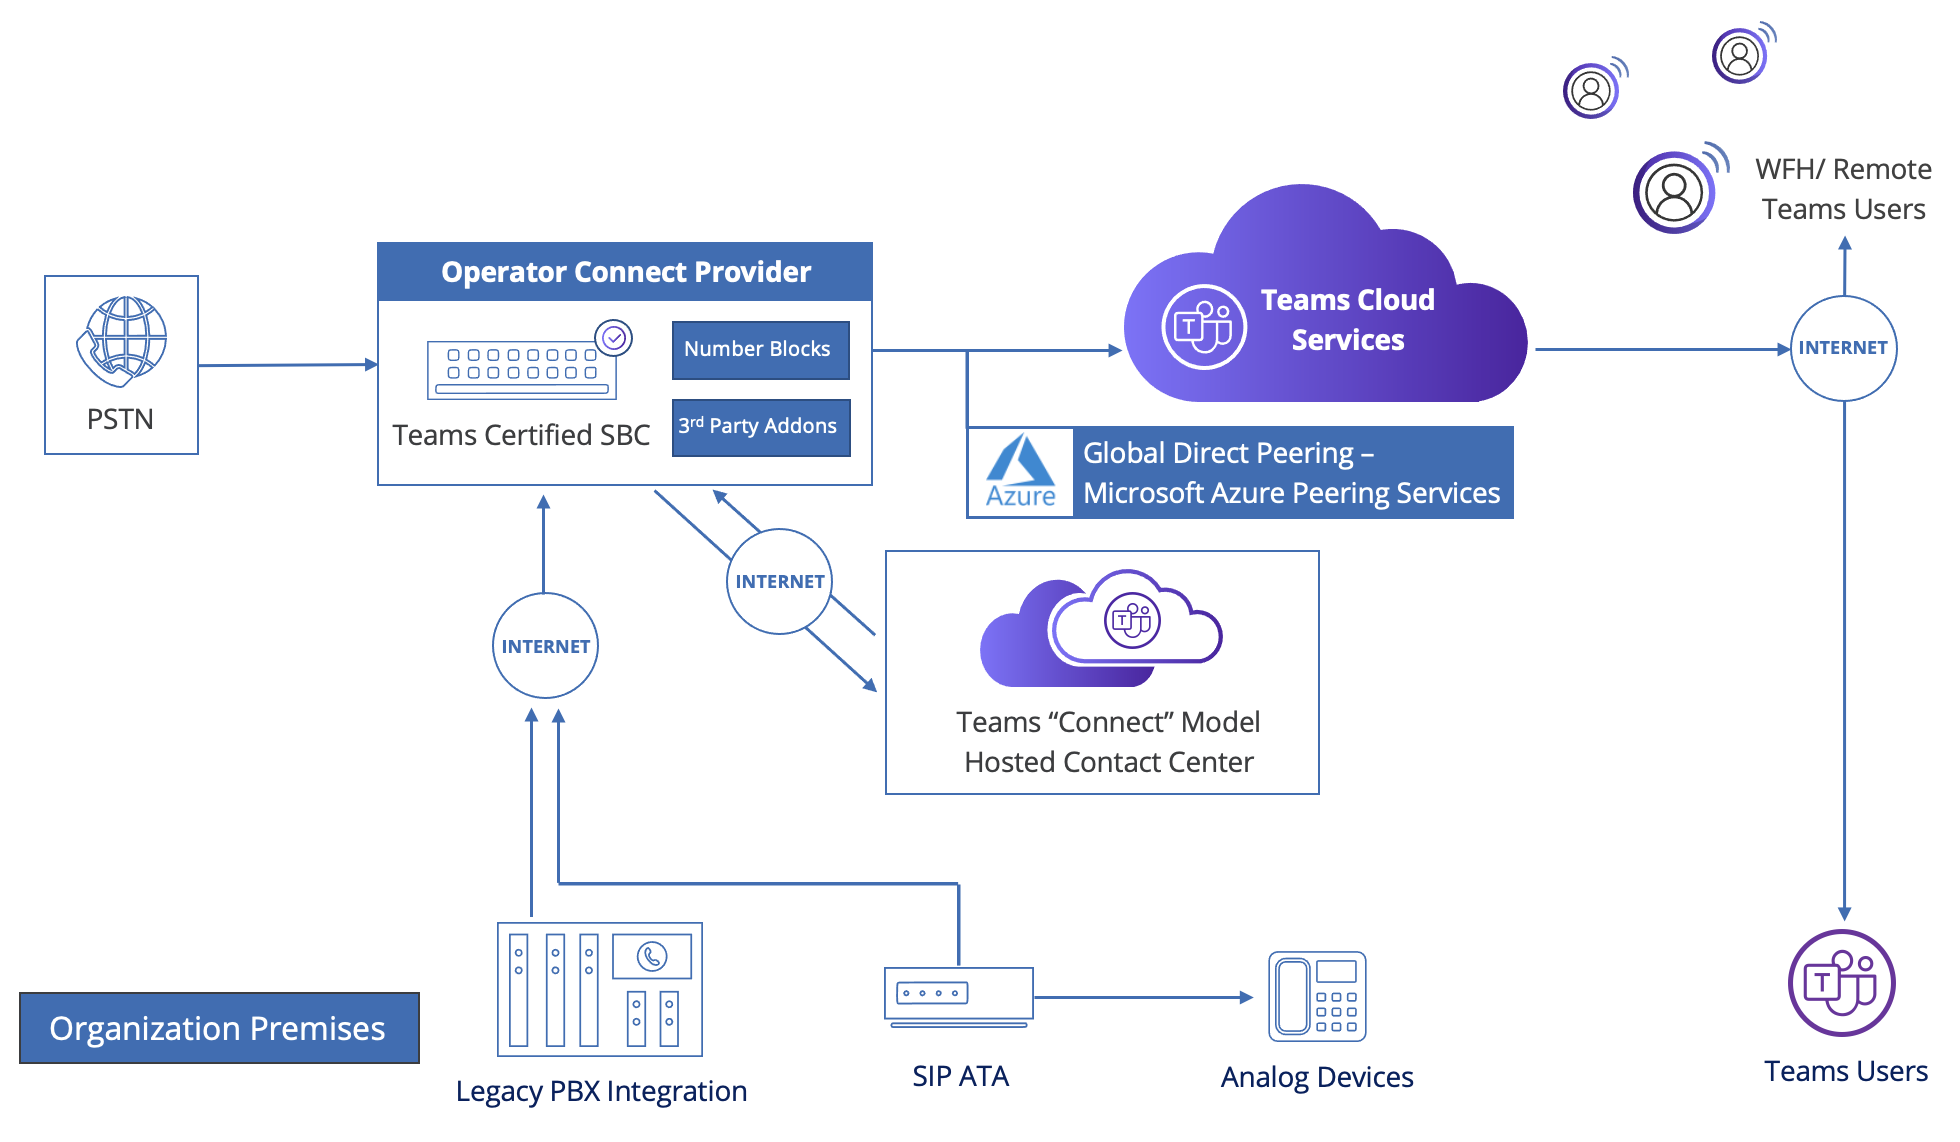 NUWAVE Operator Connect Infrastructure